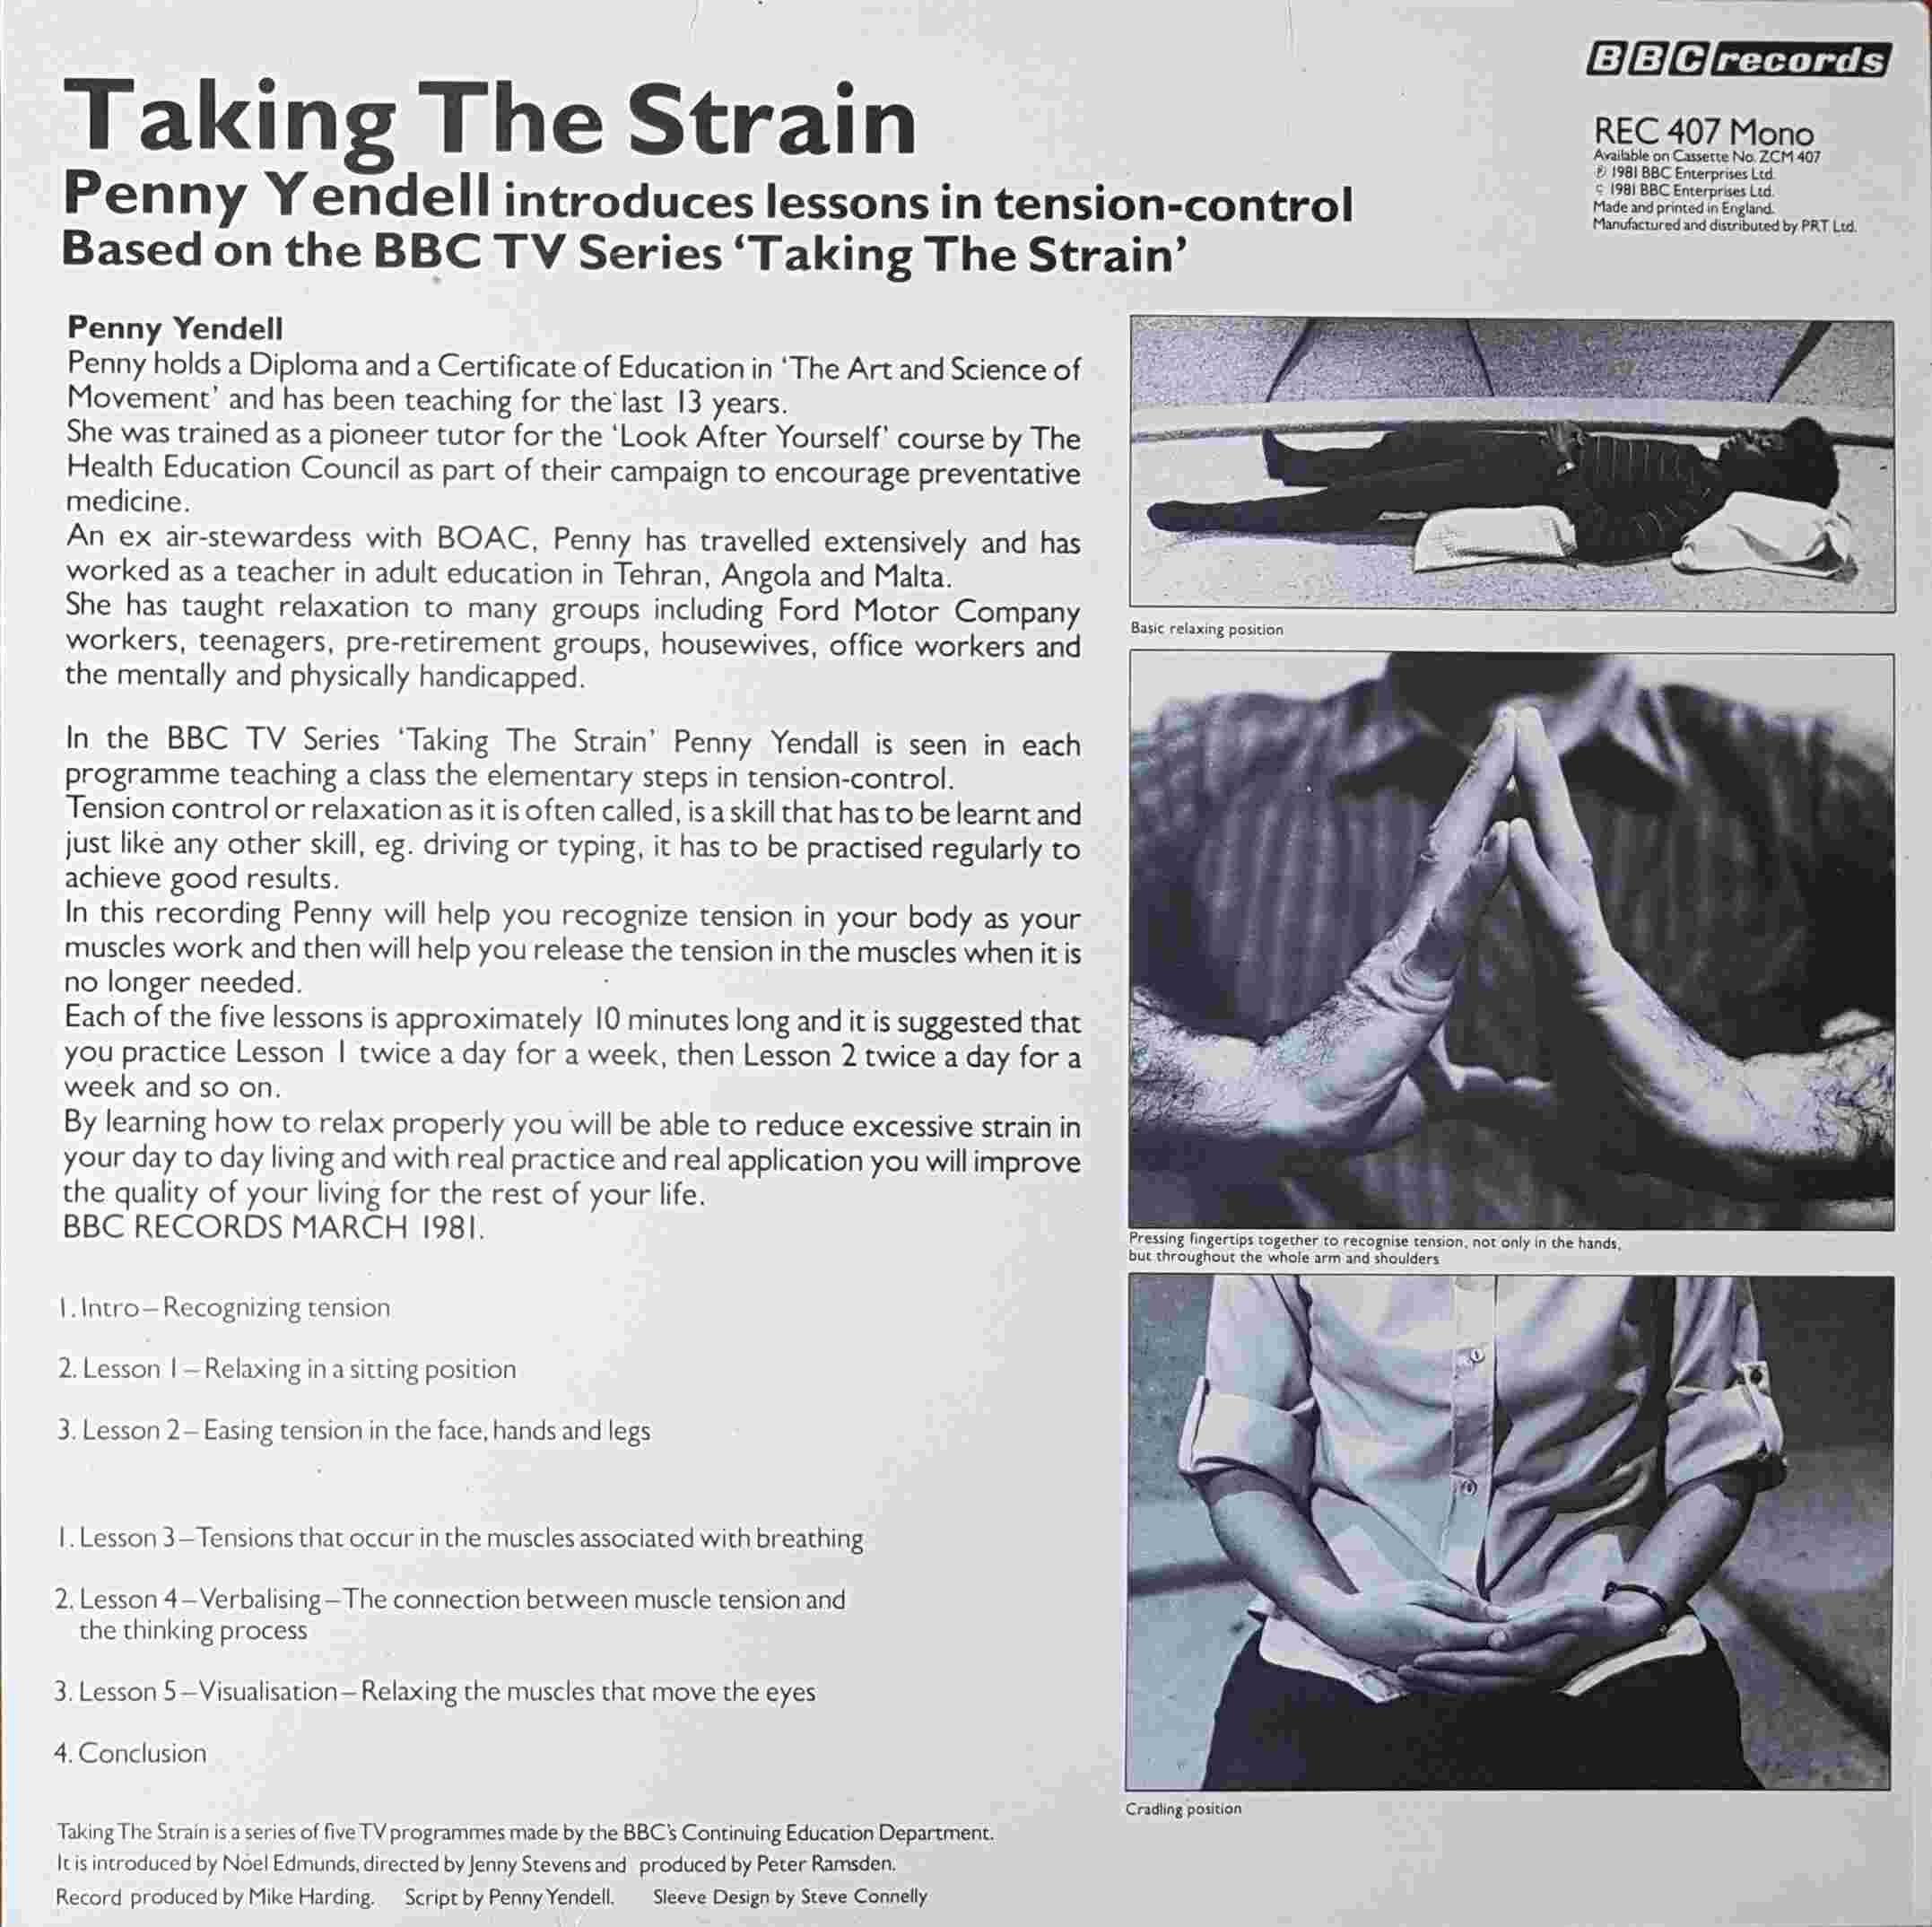 Picture of REC 407 Taking the strain by artist Penny Yendell from the BBC records and Tapes library